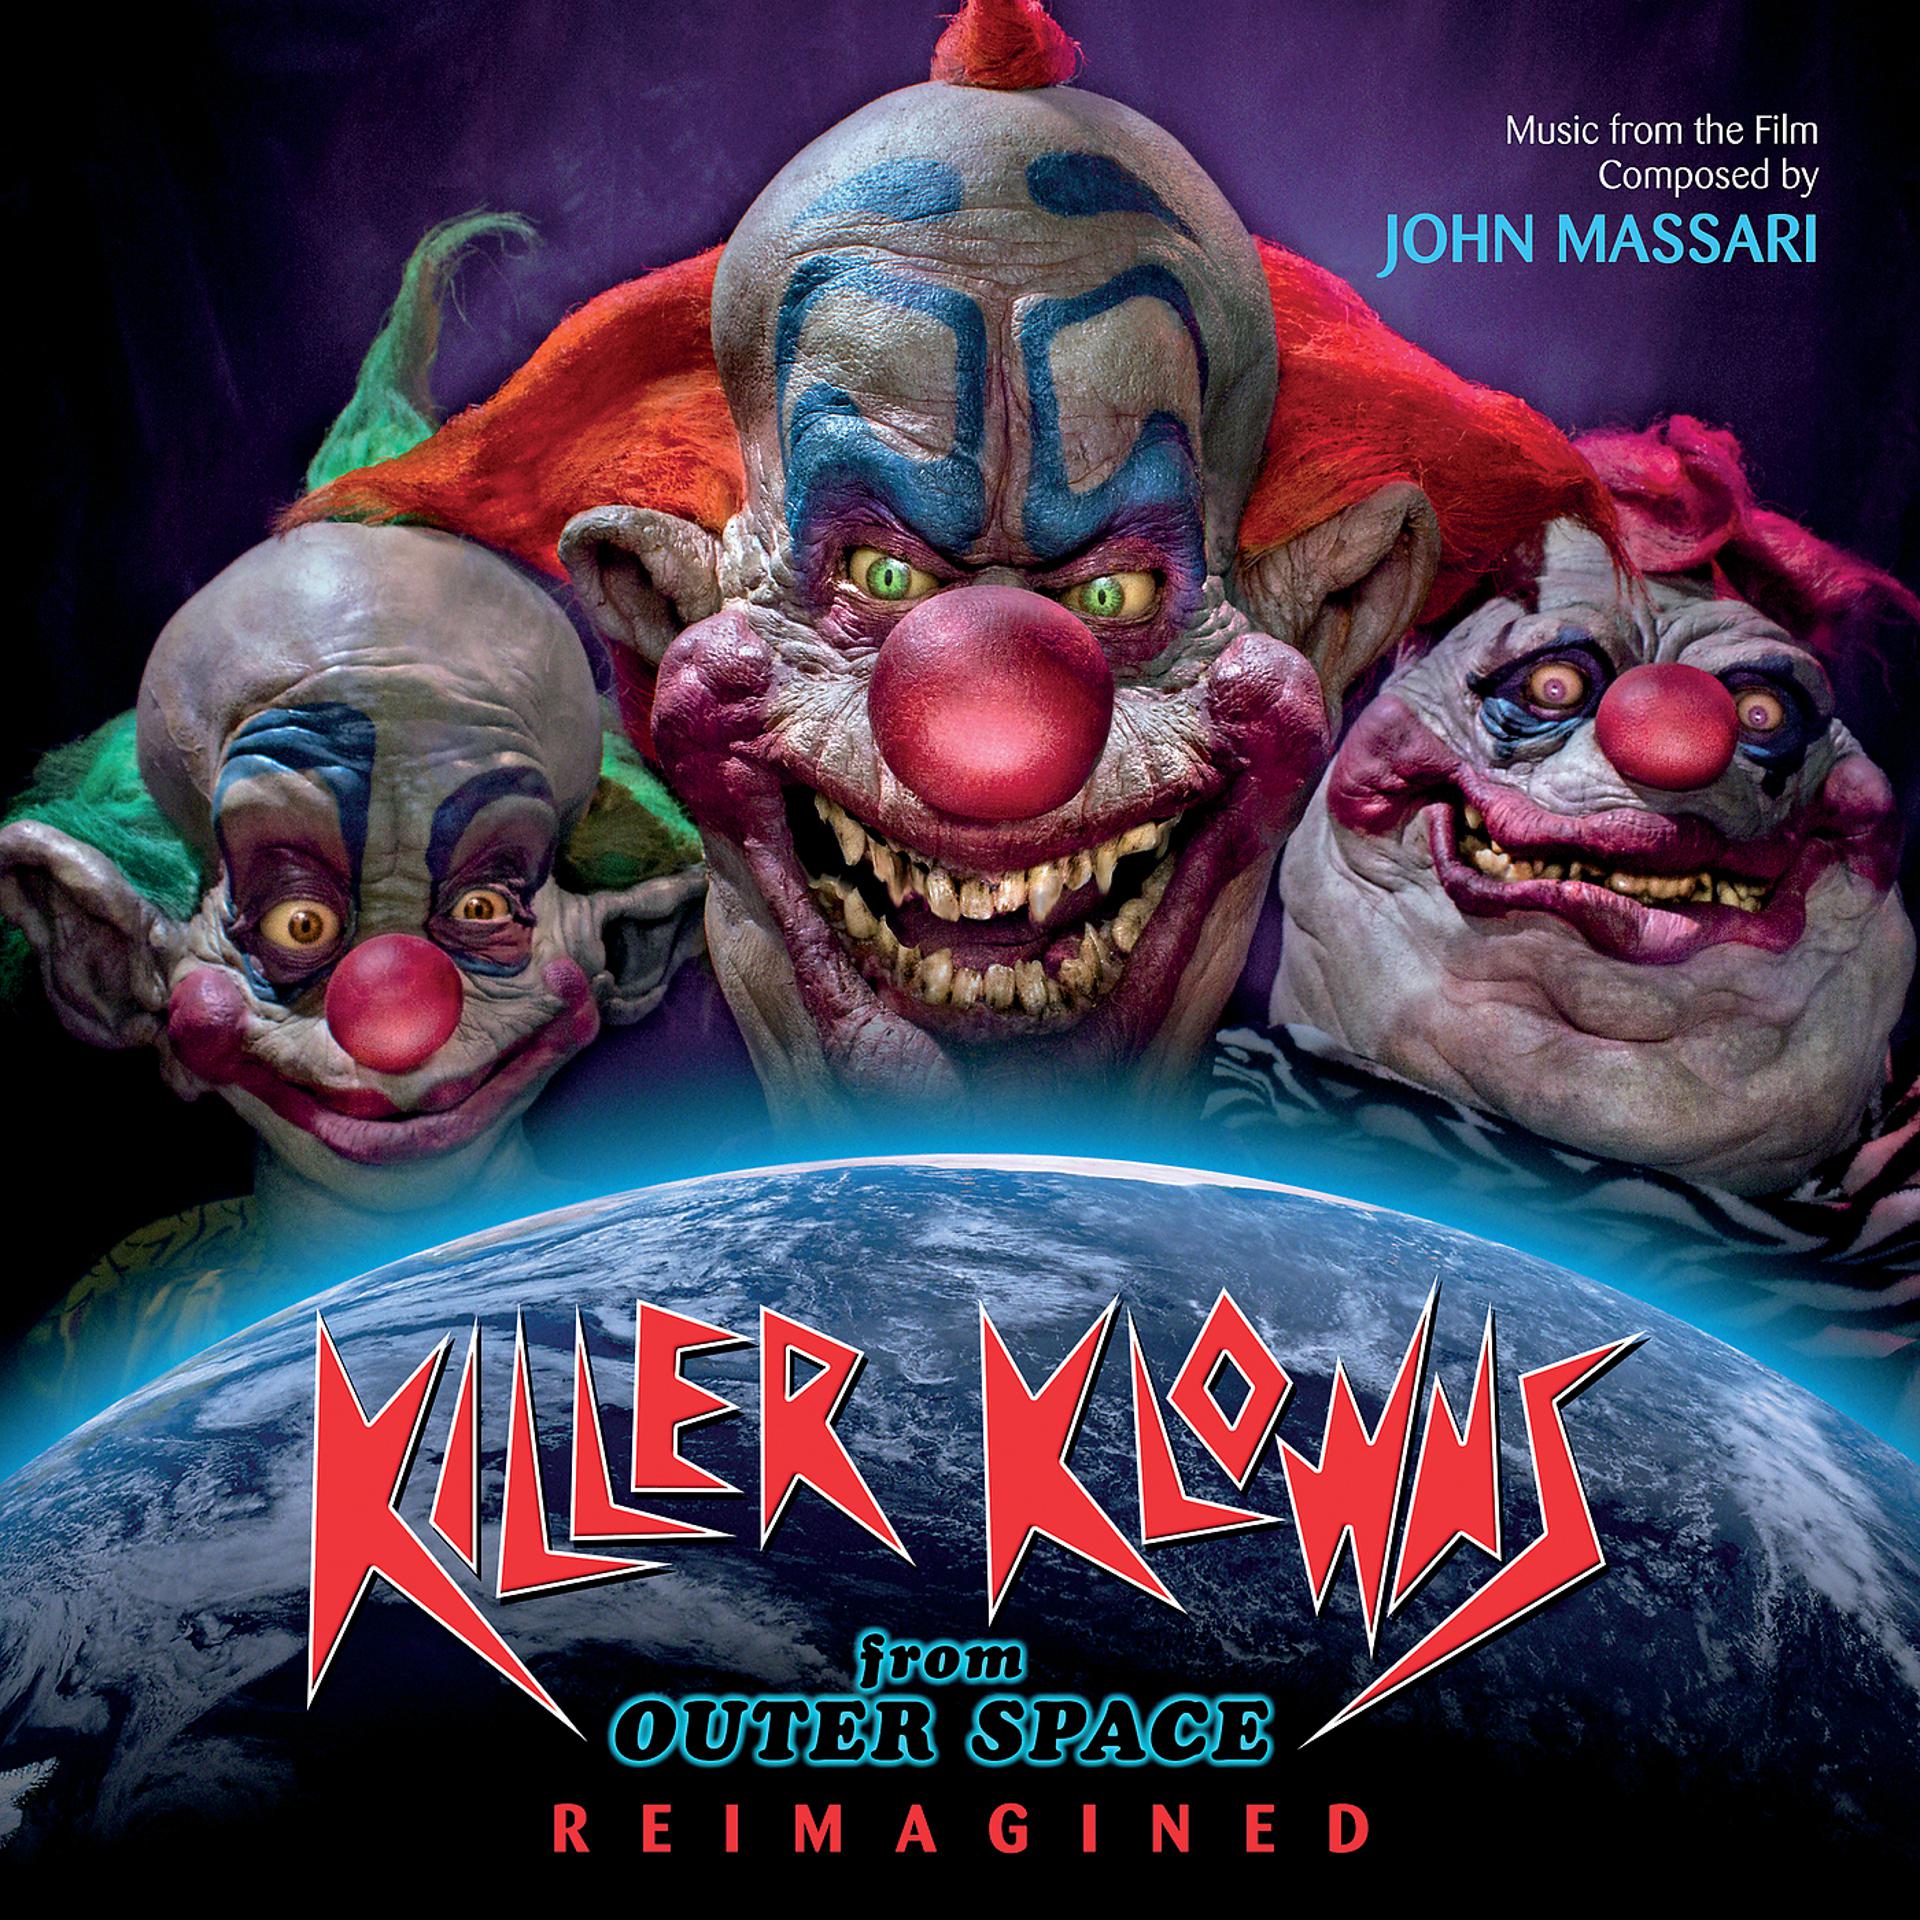 Killer from outer space. Клоуны-убийцы из космоса. Klowns from Outer Space.